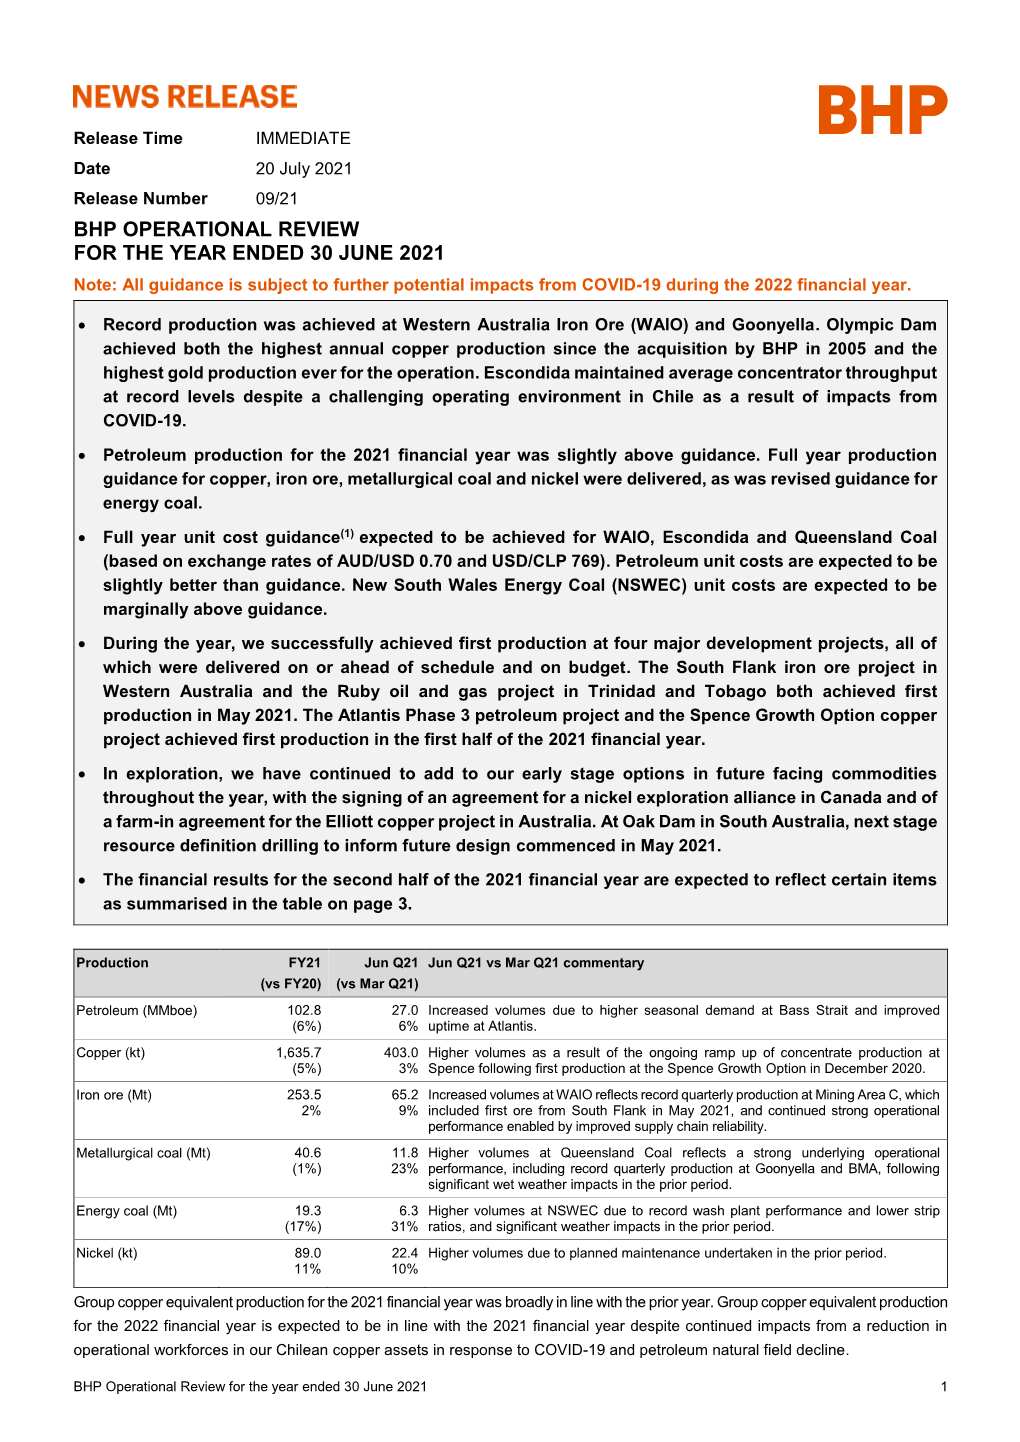 BHP OPERATIONAL REVIEW for the YEAR ENDED 30 JUNE 2021 Note: All Guidance Is Subject to Further Potential Impacts from COVID-19 During the 2022 Financial Year